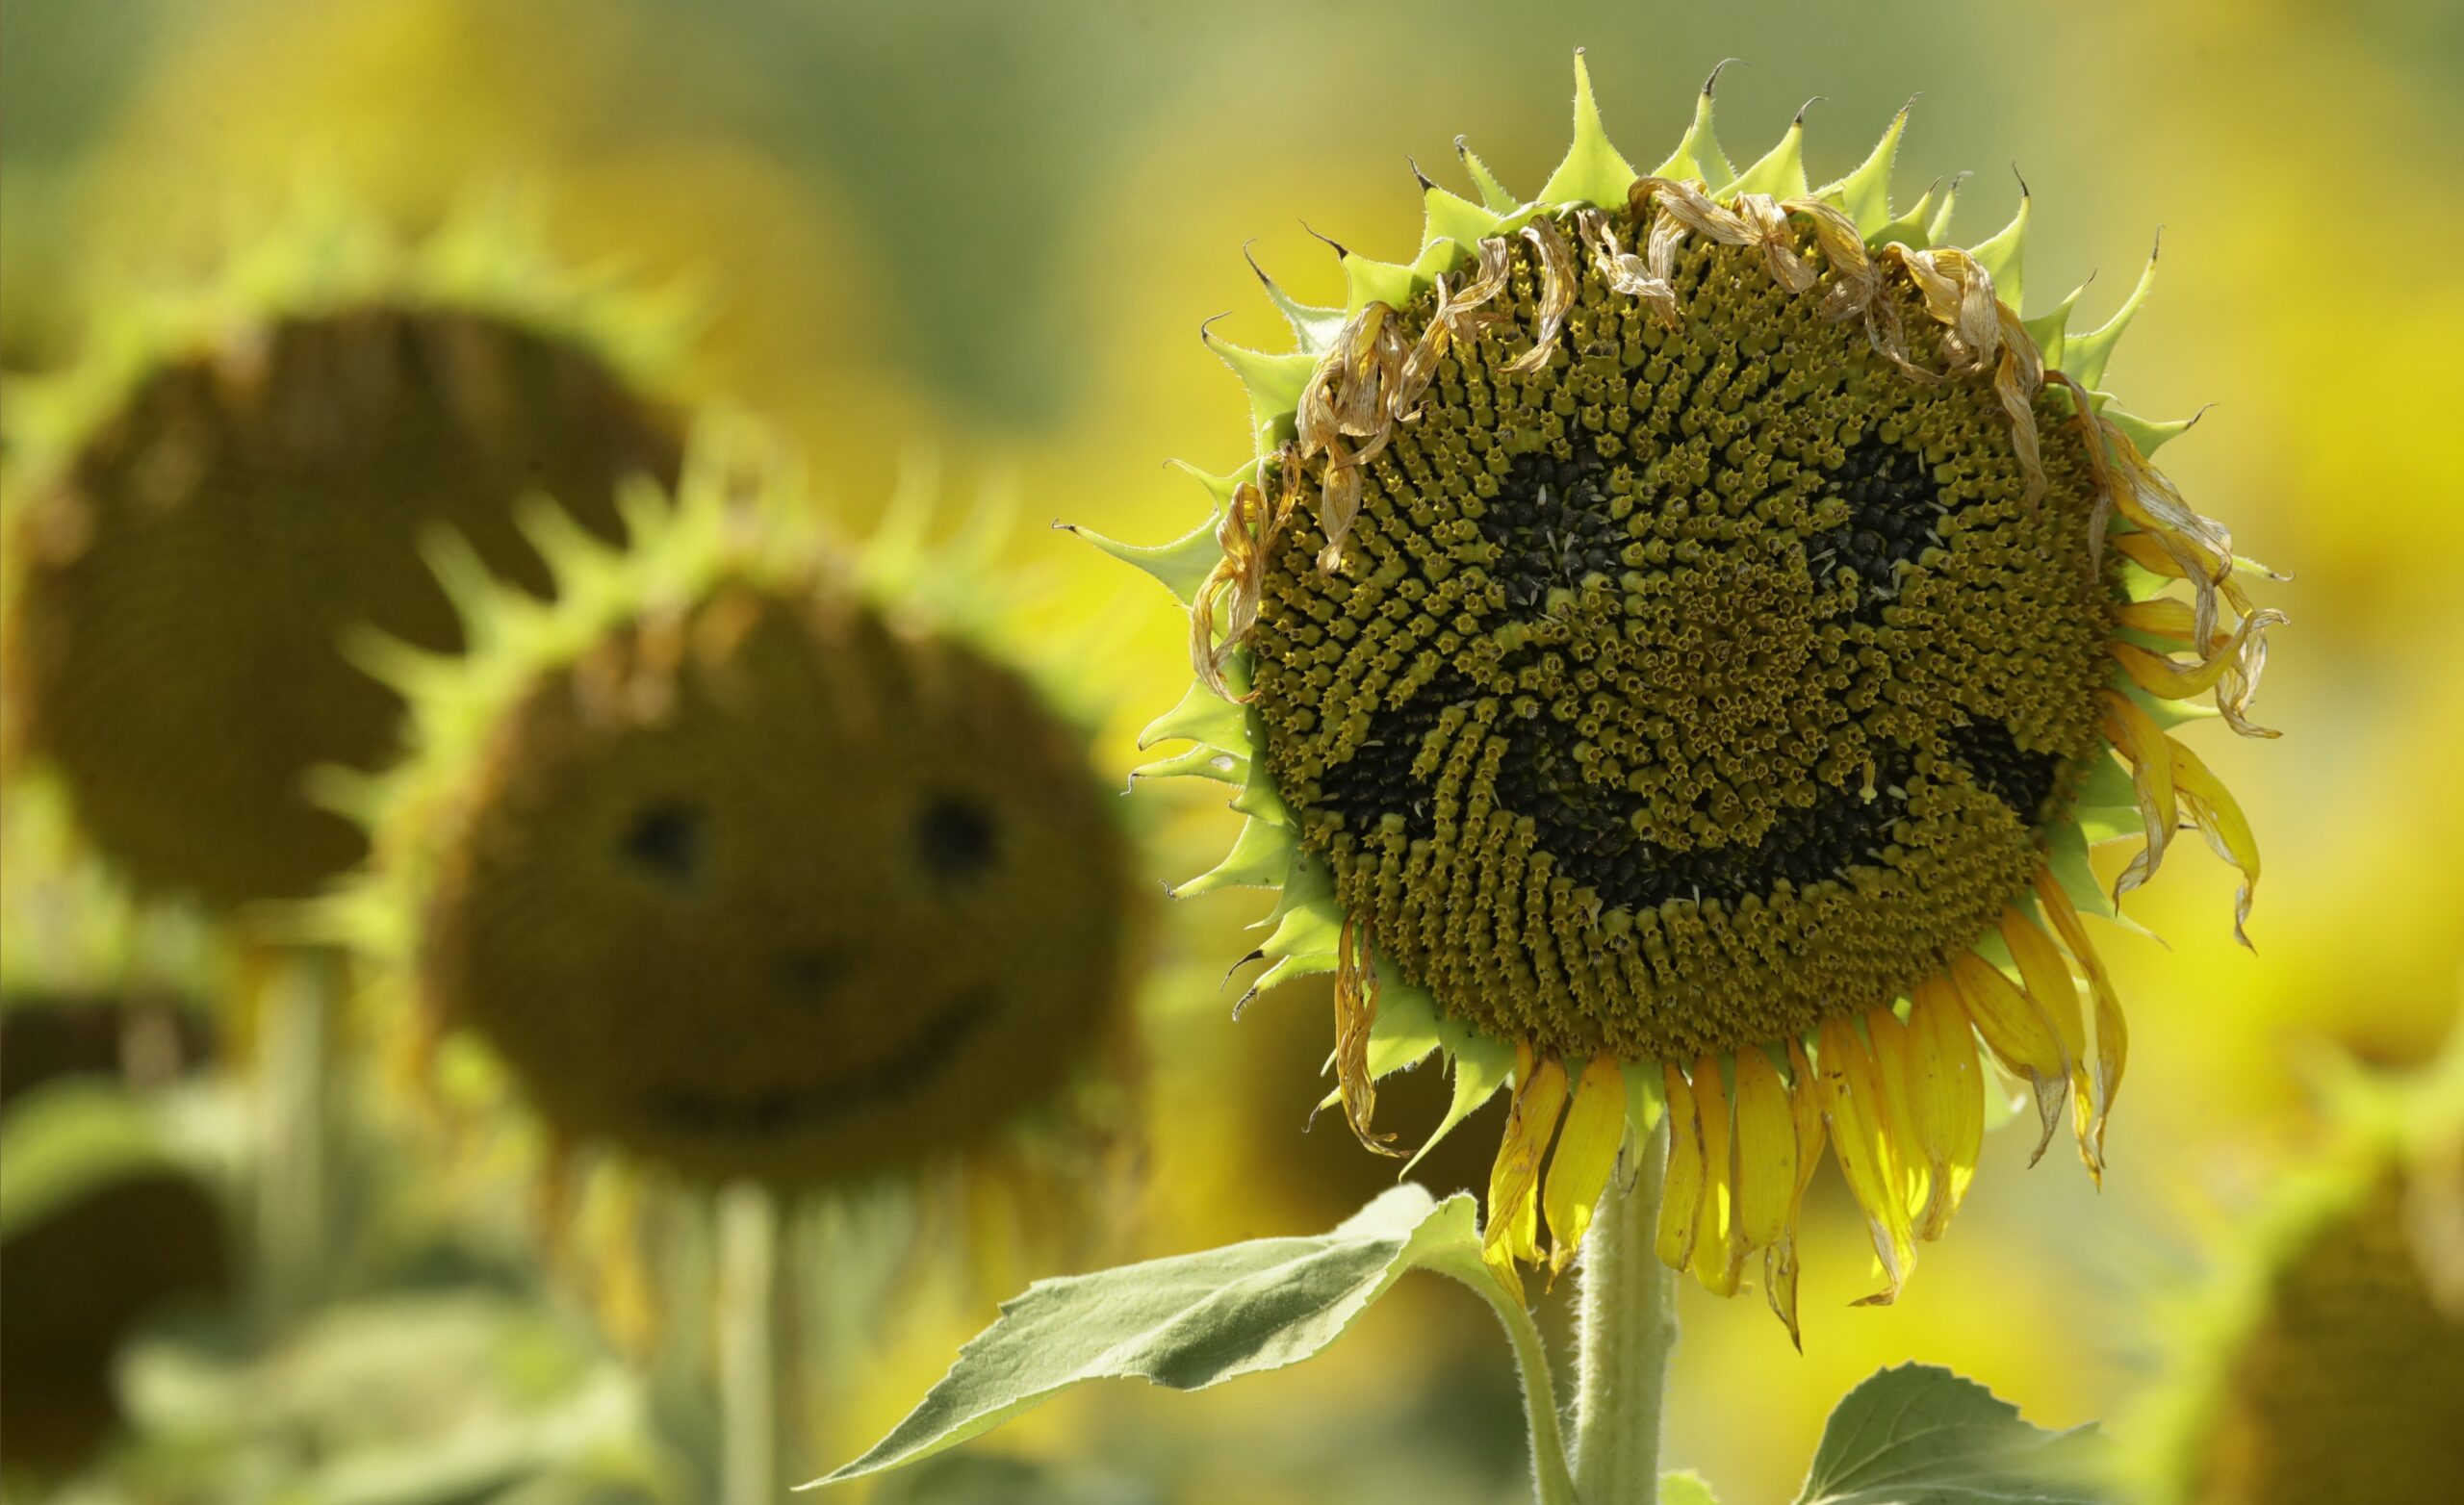 Smiley faces on two sunflowers in a field